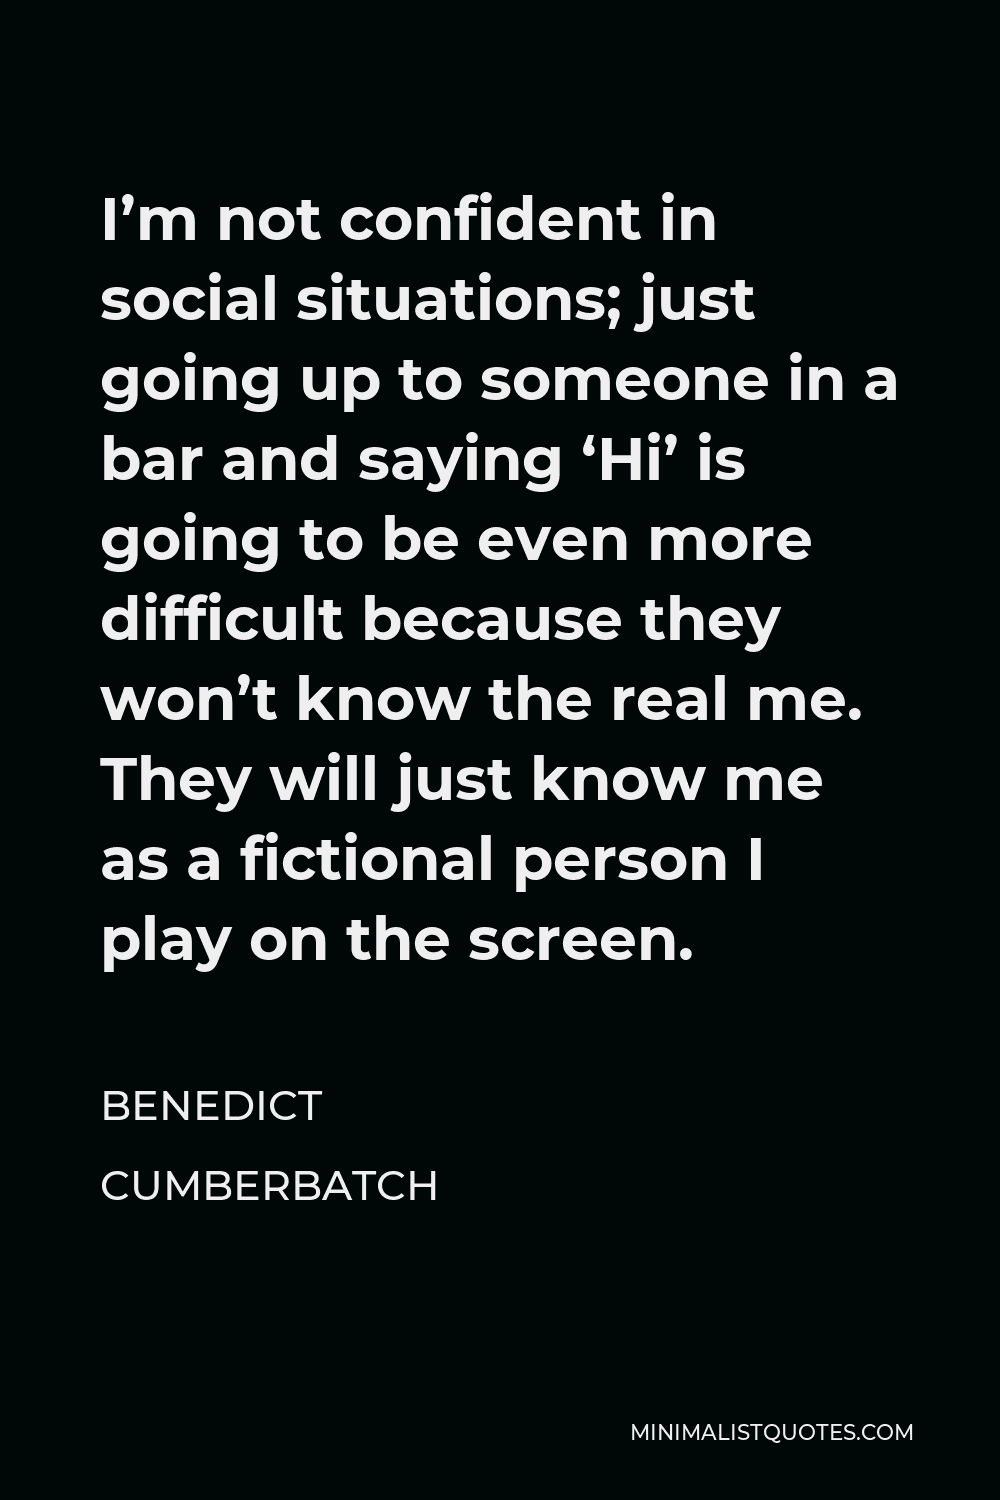 Benedict Cumberbatch Quote - I’m not confident in social situations; just going up to someone in a bar and saying ‘Hi’ is going to be even more difficult because they won’t know the real me. They will just know me as a fictional person I play on the screen.